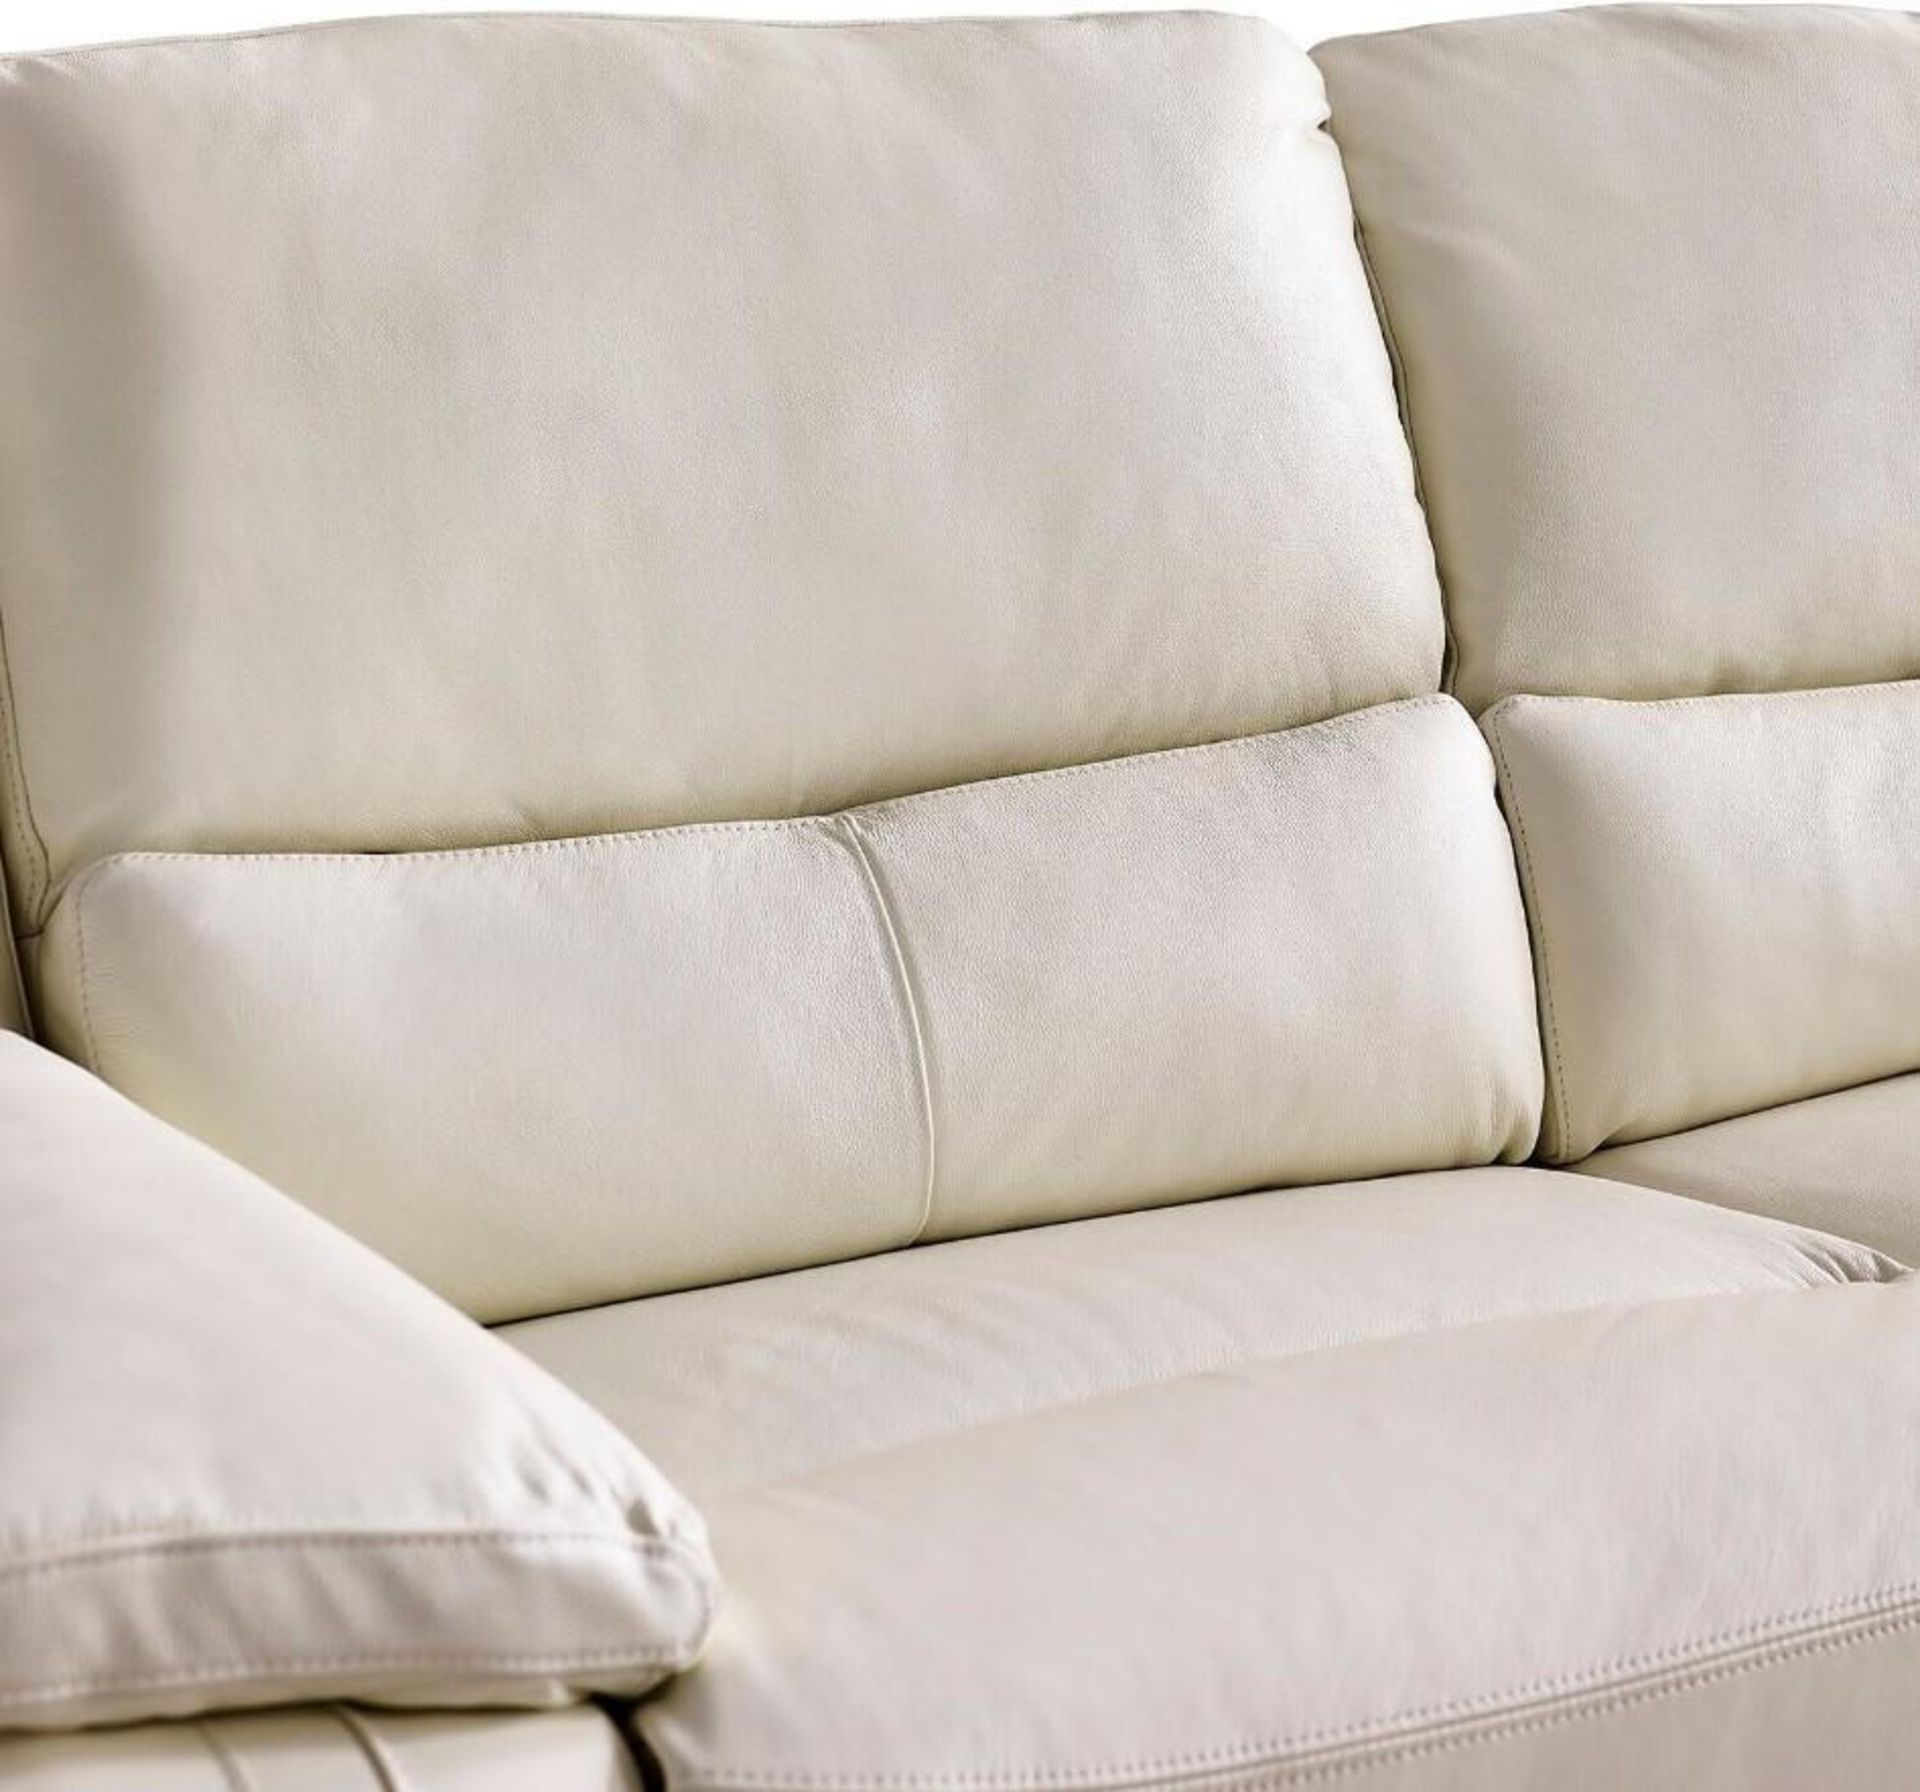 Brand new and boxed SCS Fallon 3 + 2 seater electric reclining sofa in Cream. - Image 5 of 7